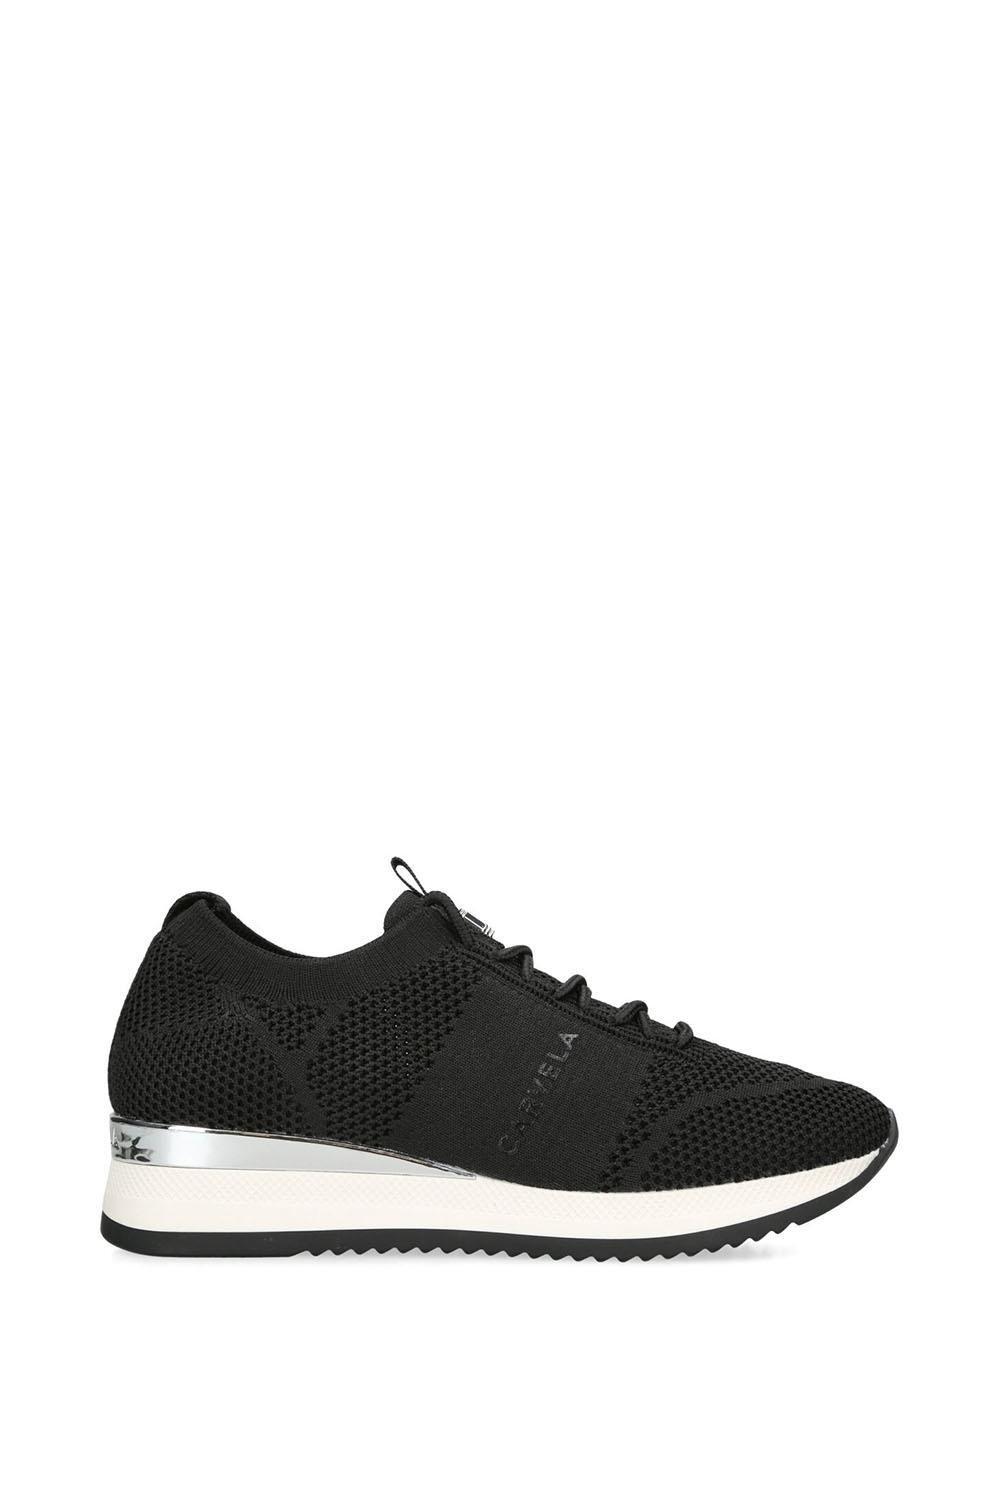 Кроссовки 'Frame Knit' Fabric Trainers Carvela, черный кроссовки frame runner trainers carvela черный